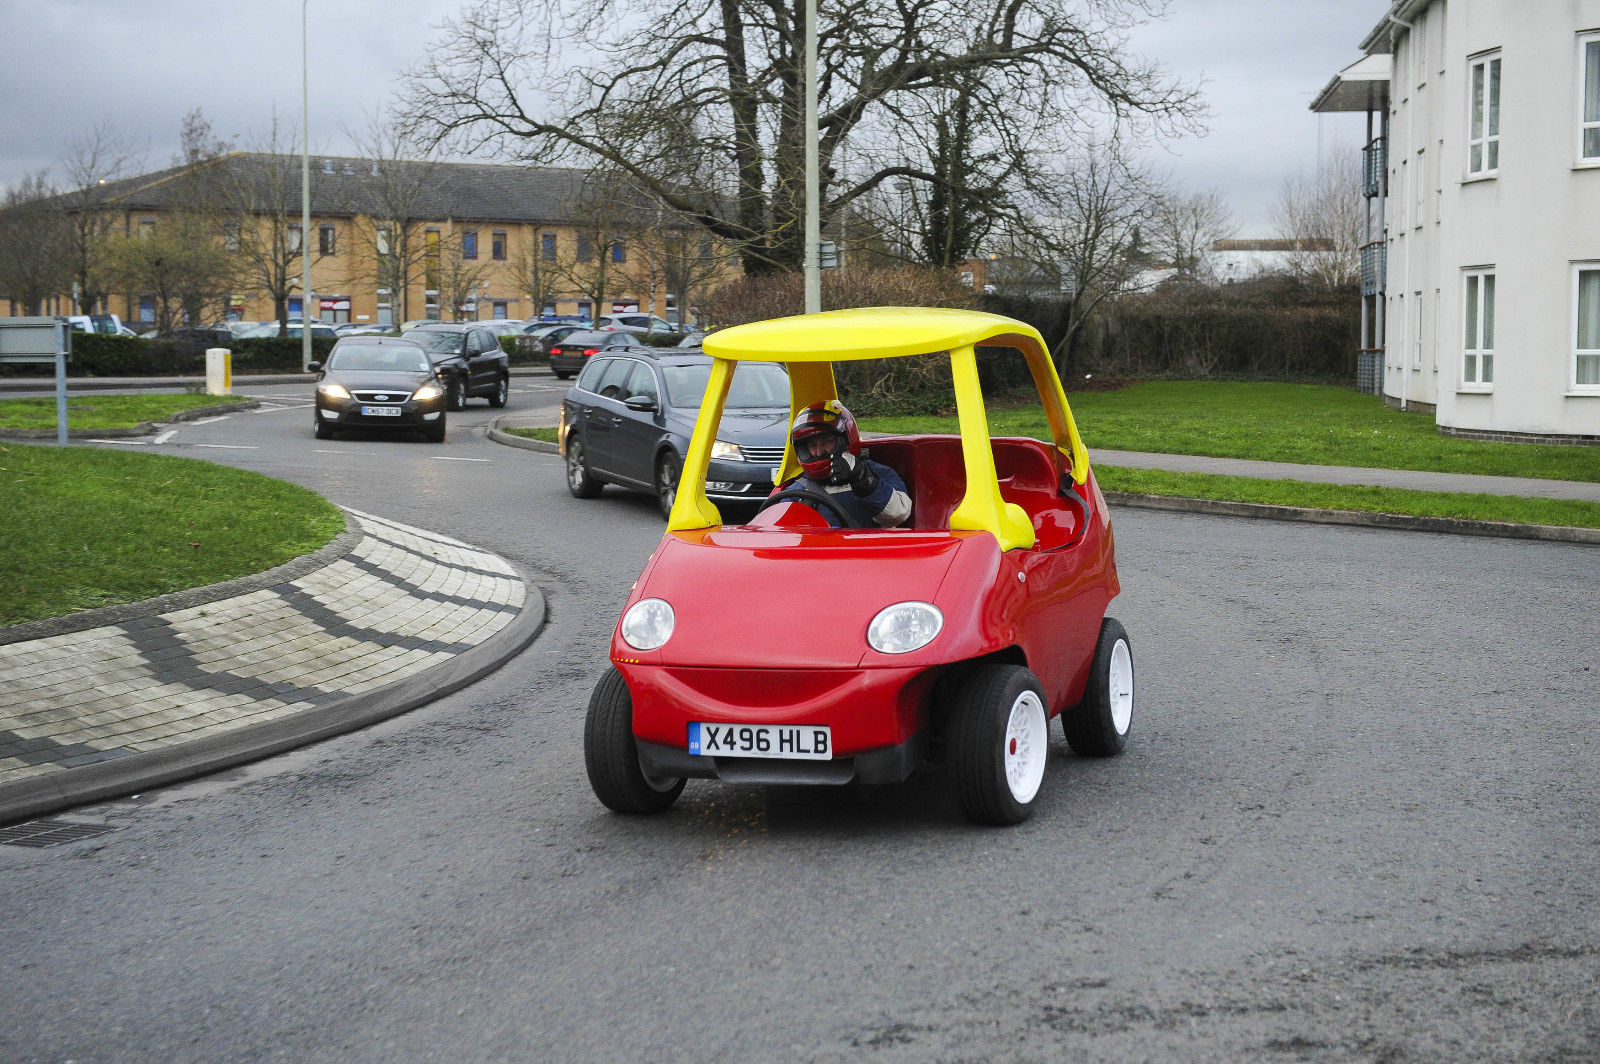 Ebay Find: Finding The Car Of Your Childhood Dreams – A Drivable Cozy Coupe!